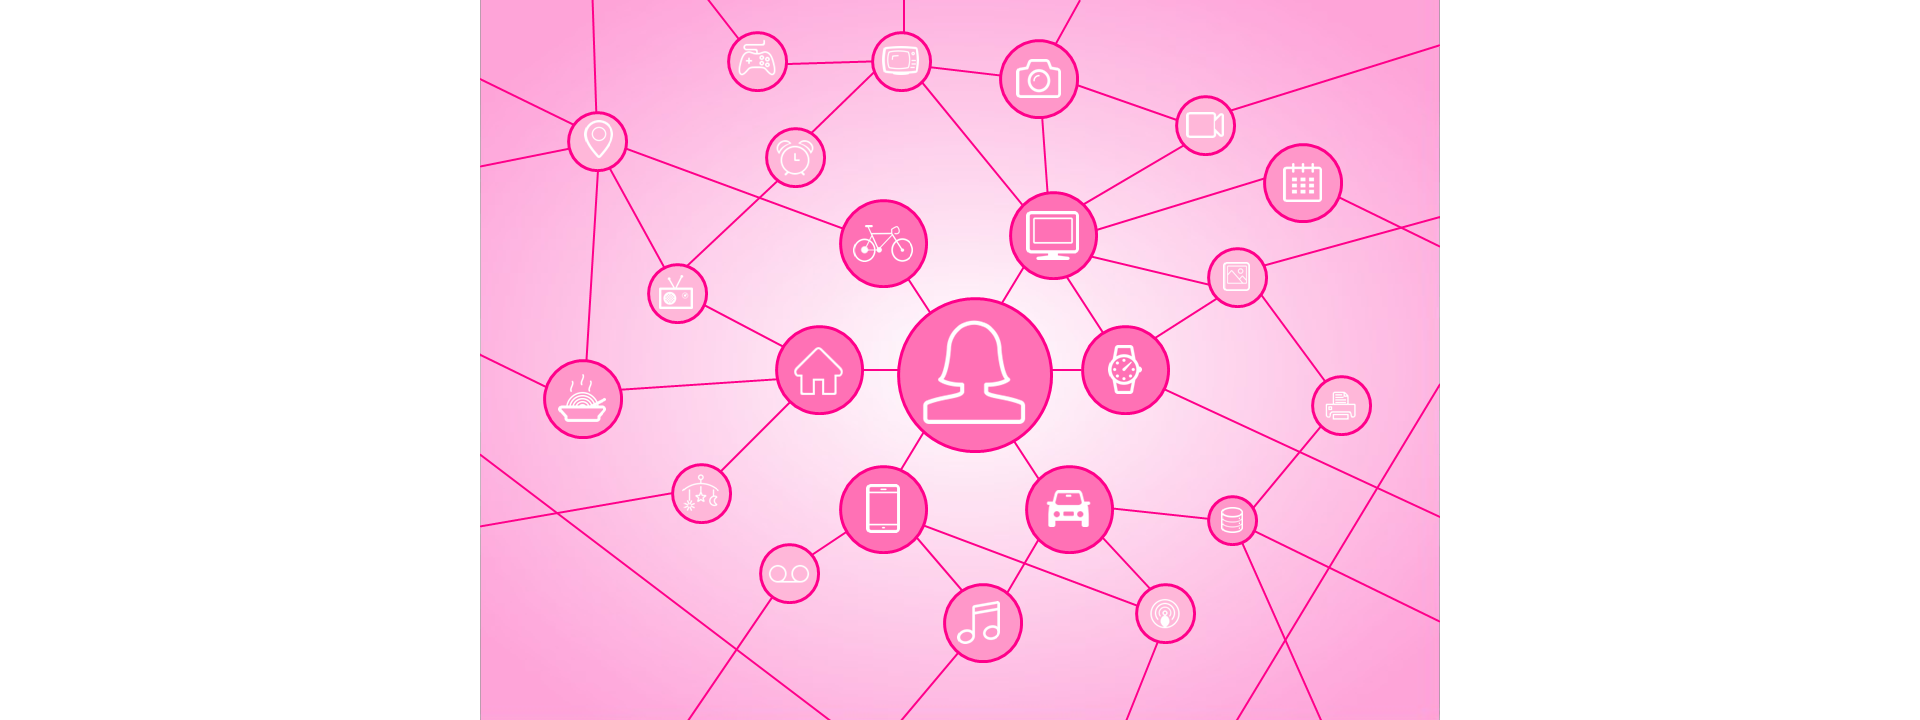 A pink network with a user avatar in the middle, with pink icons of a home, car, bicycle, watch, computer, and phone in the next outer layer, followed by various other icons representing music, food, etc.